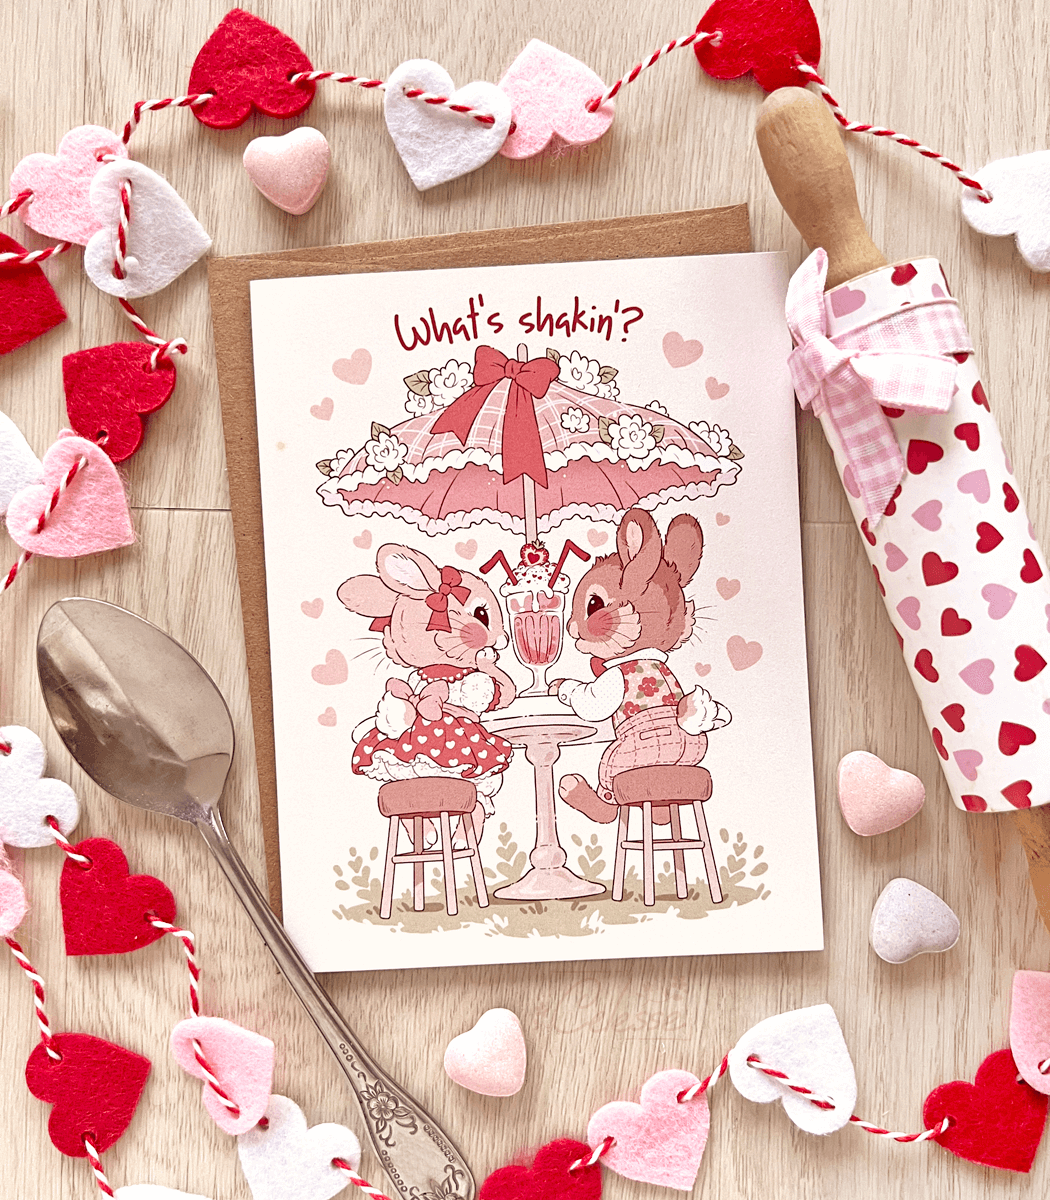 I think this is my favorite of the Valentine's cards I made 🥰 